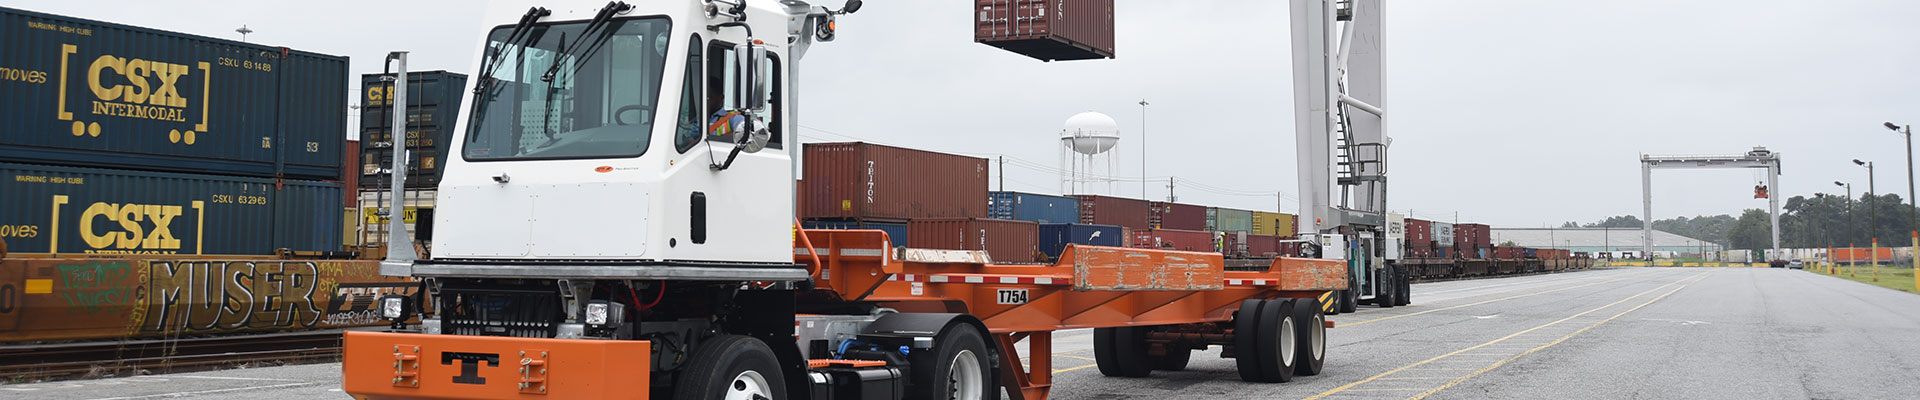 New Tico Terminal Tractor leaving lot